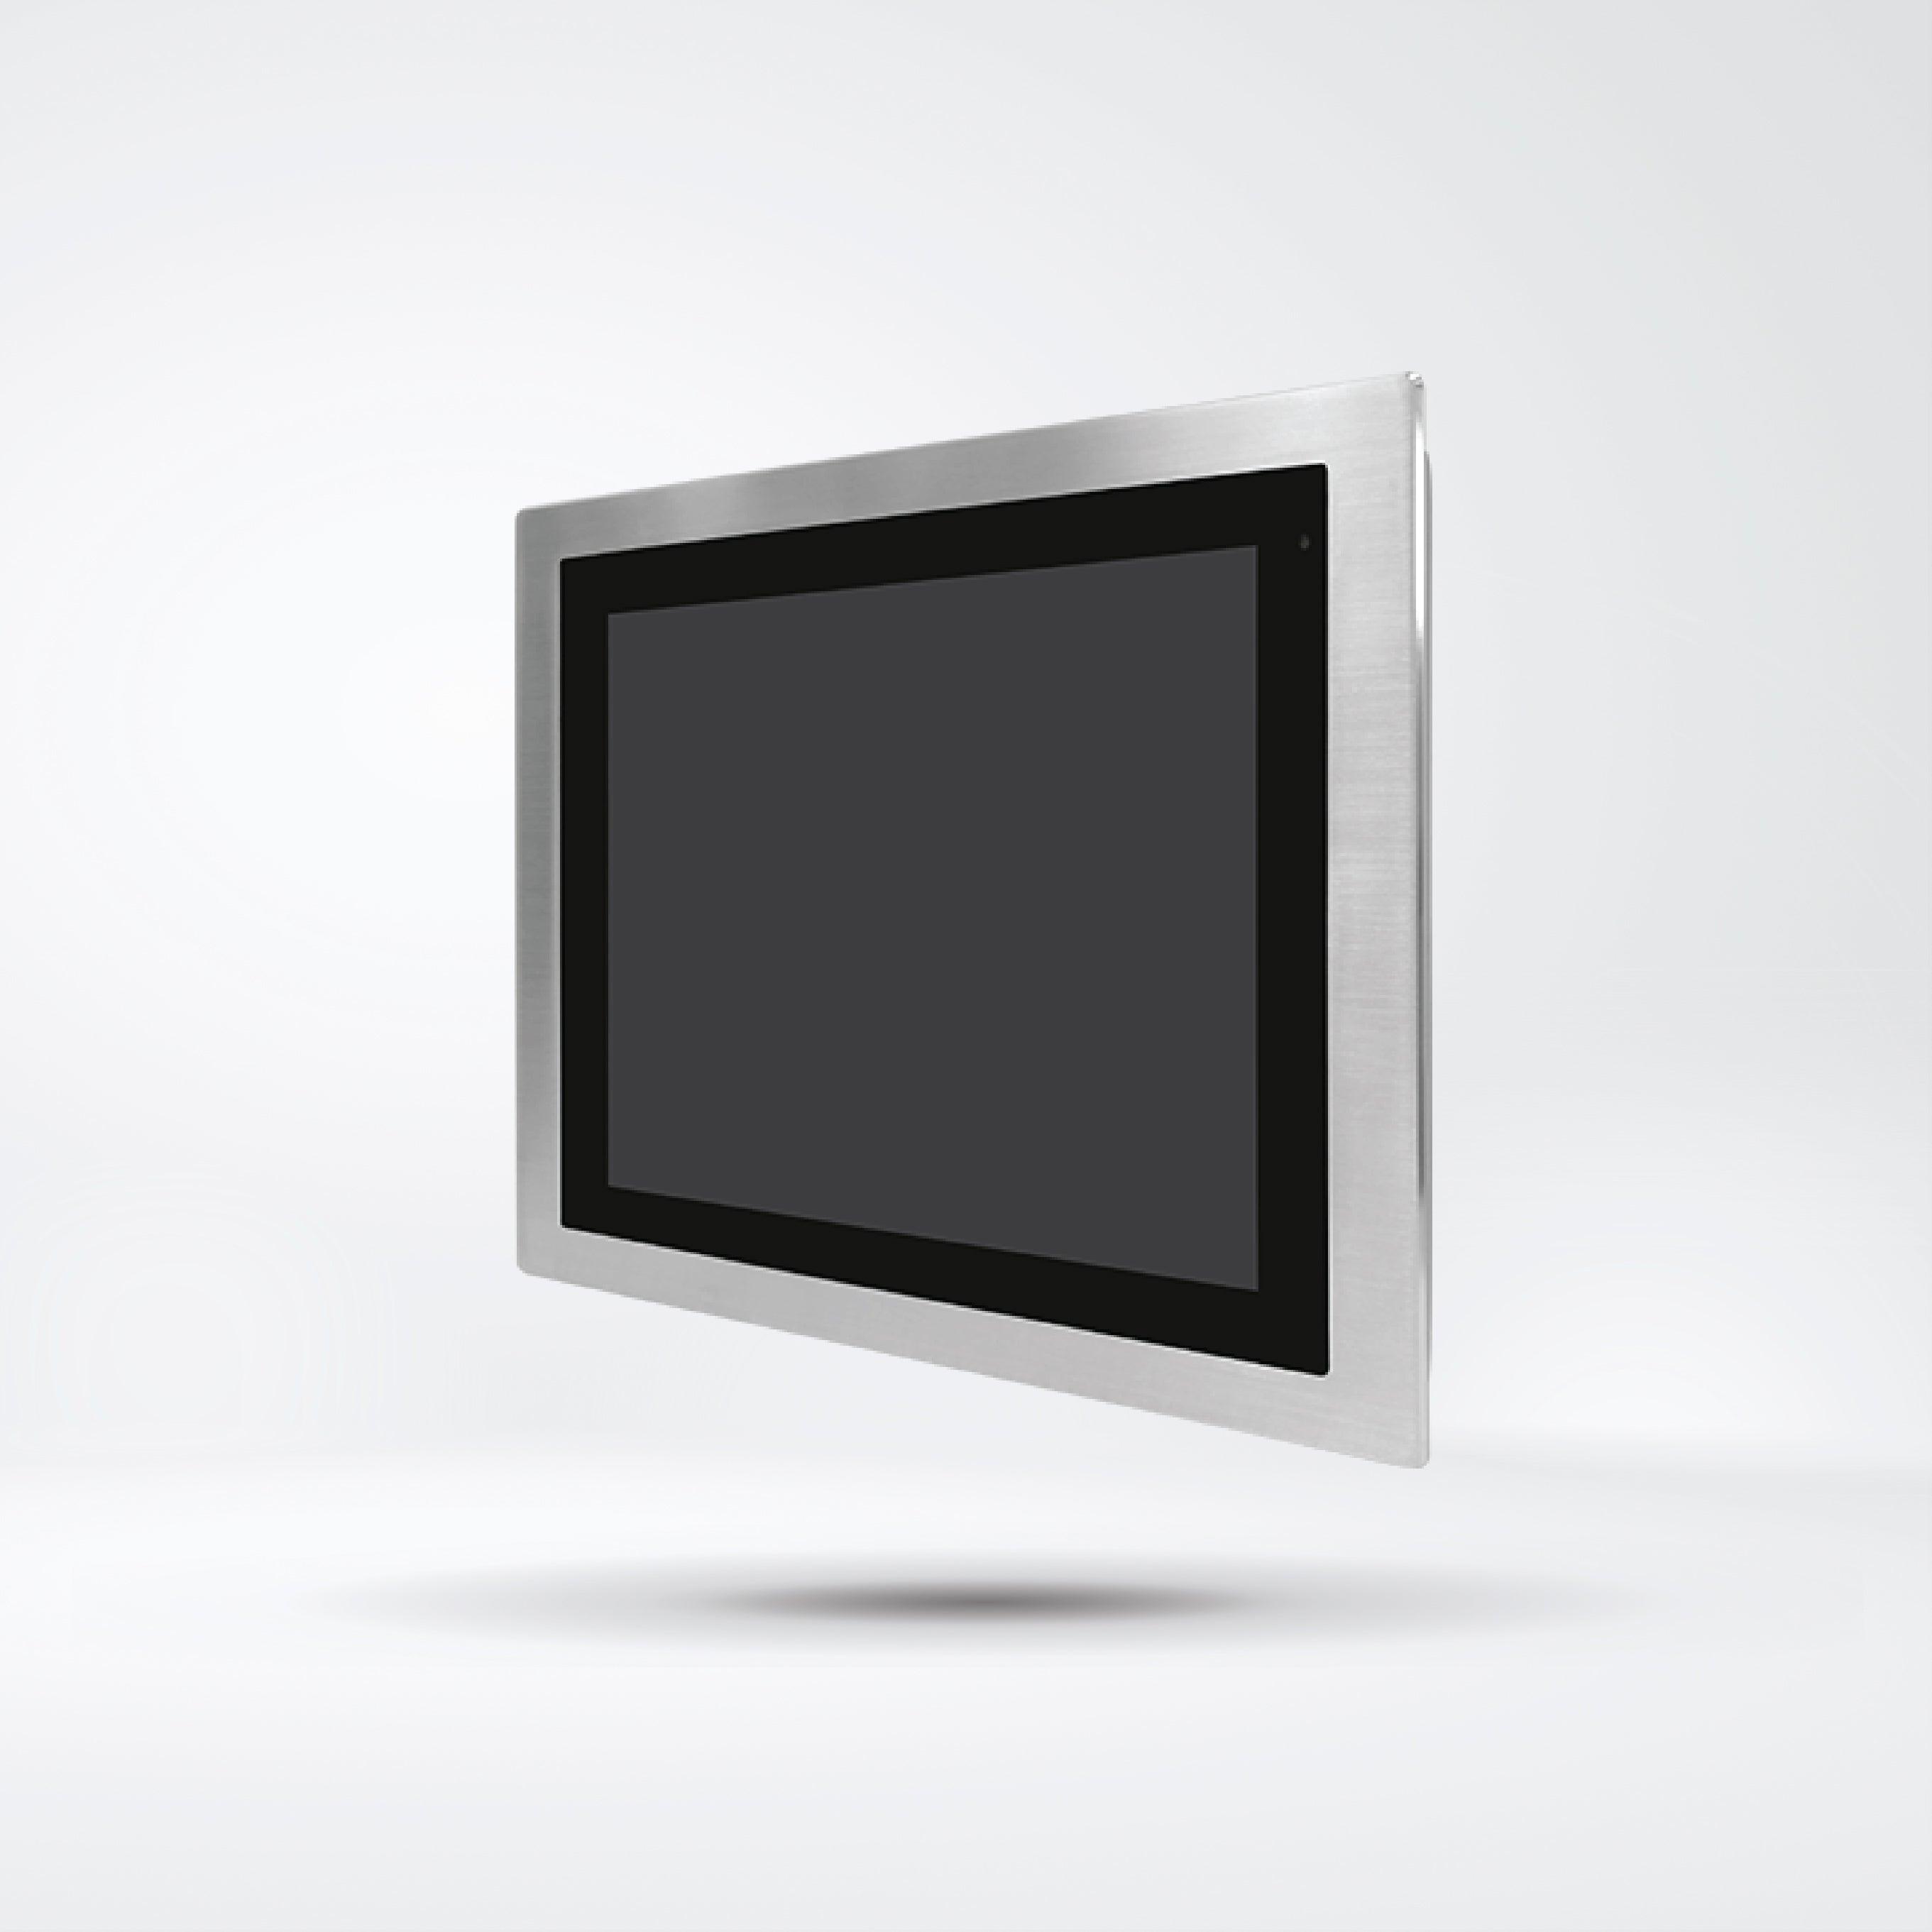 FABS-115G 15” Flat Front Panel IP66 Stainless Chassis Display - Riverplus